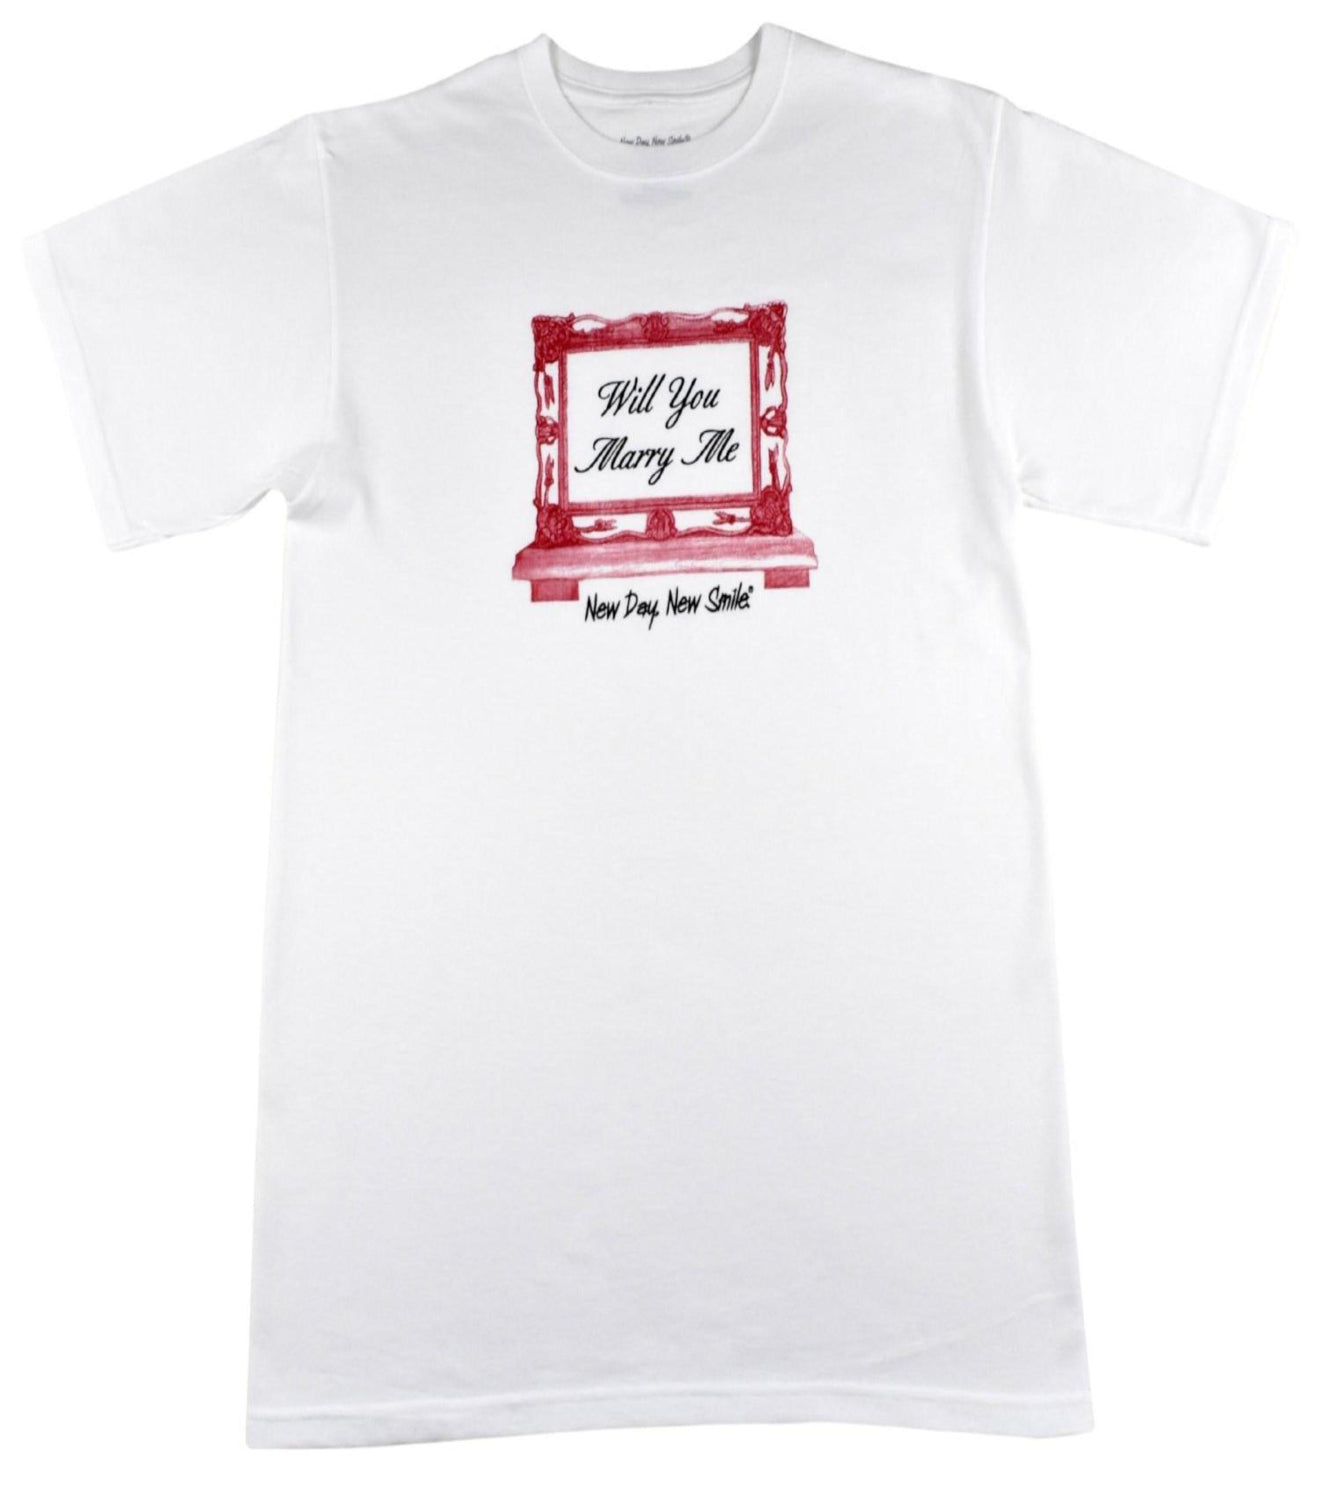 New Day New Smile Men's Will You Marry Me Tee | available at NewDayNewSmile.com